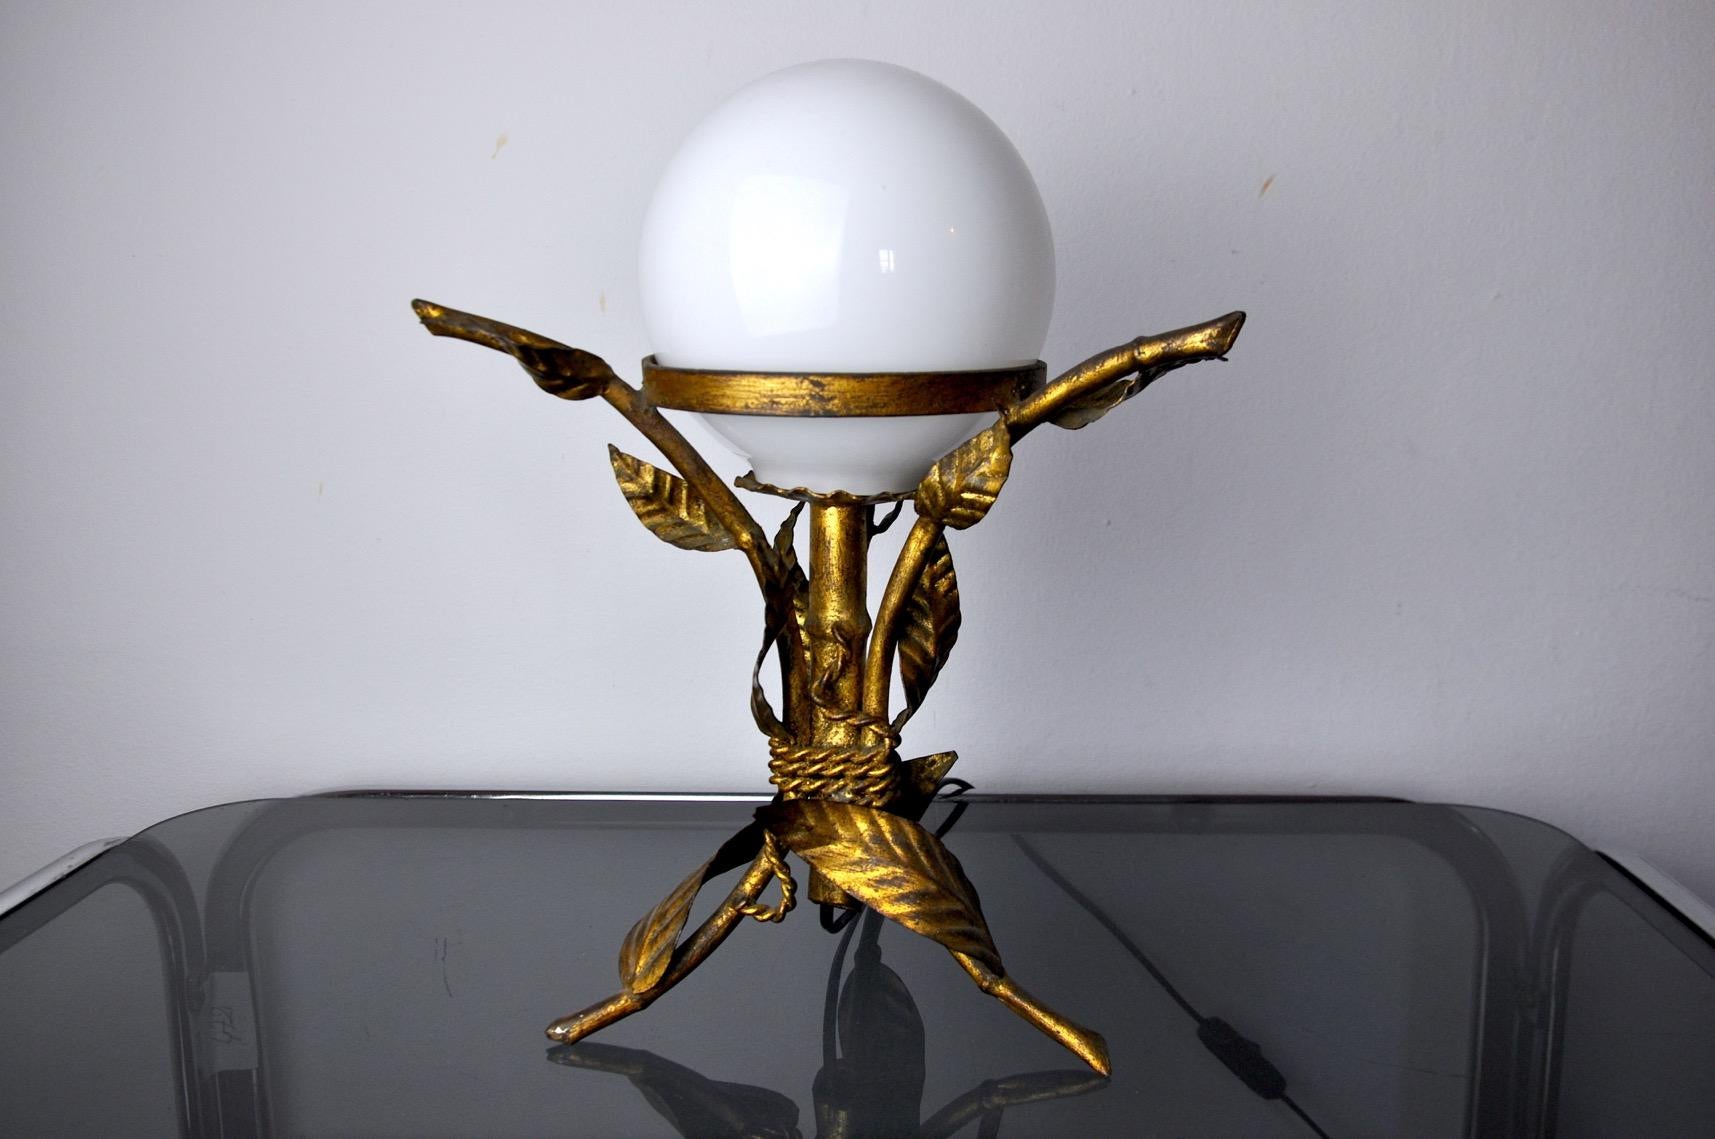 Superb floral lamp in art deco style, designed and produced in Spain in the 1960s. Structure in metal and gold leaf, globe in opaline, a true work of art. Unique object that will illuminate wonderfully and bring a real design touch to your interior.